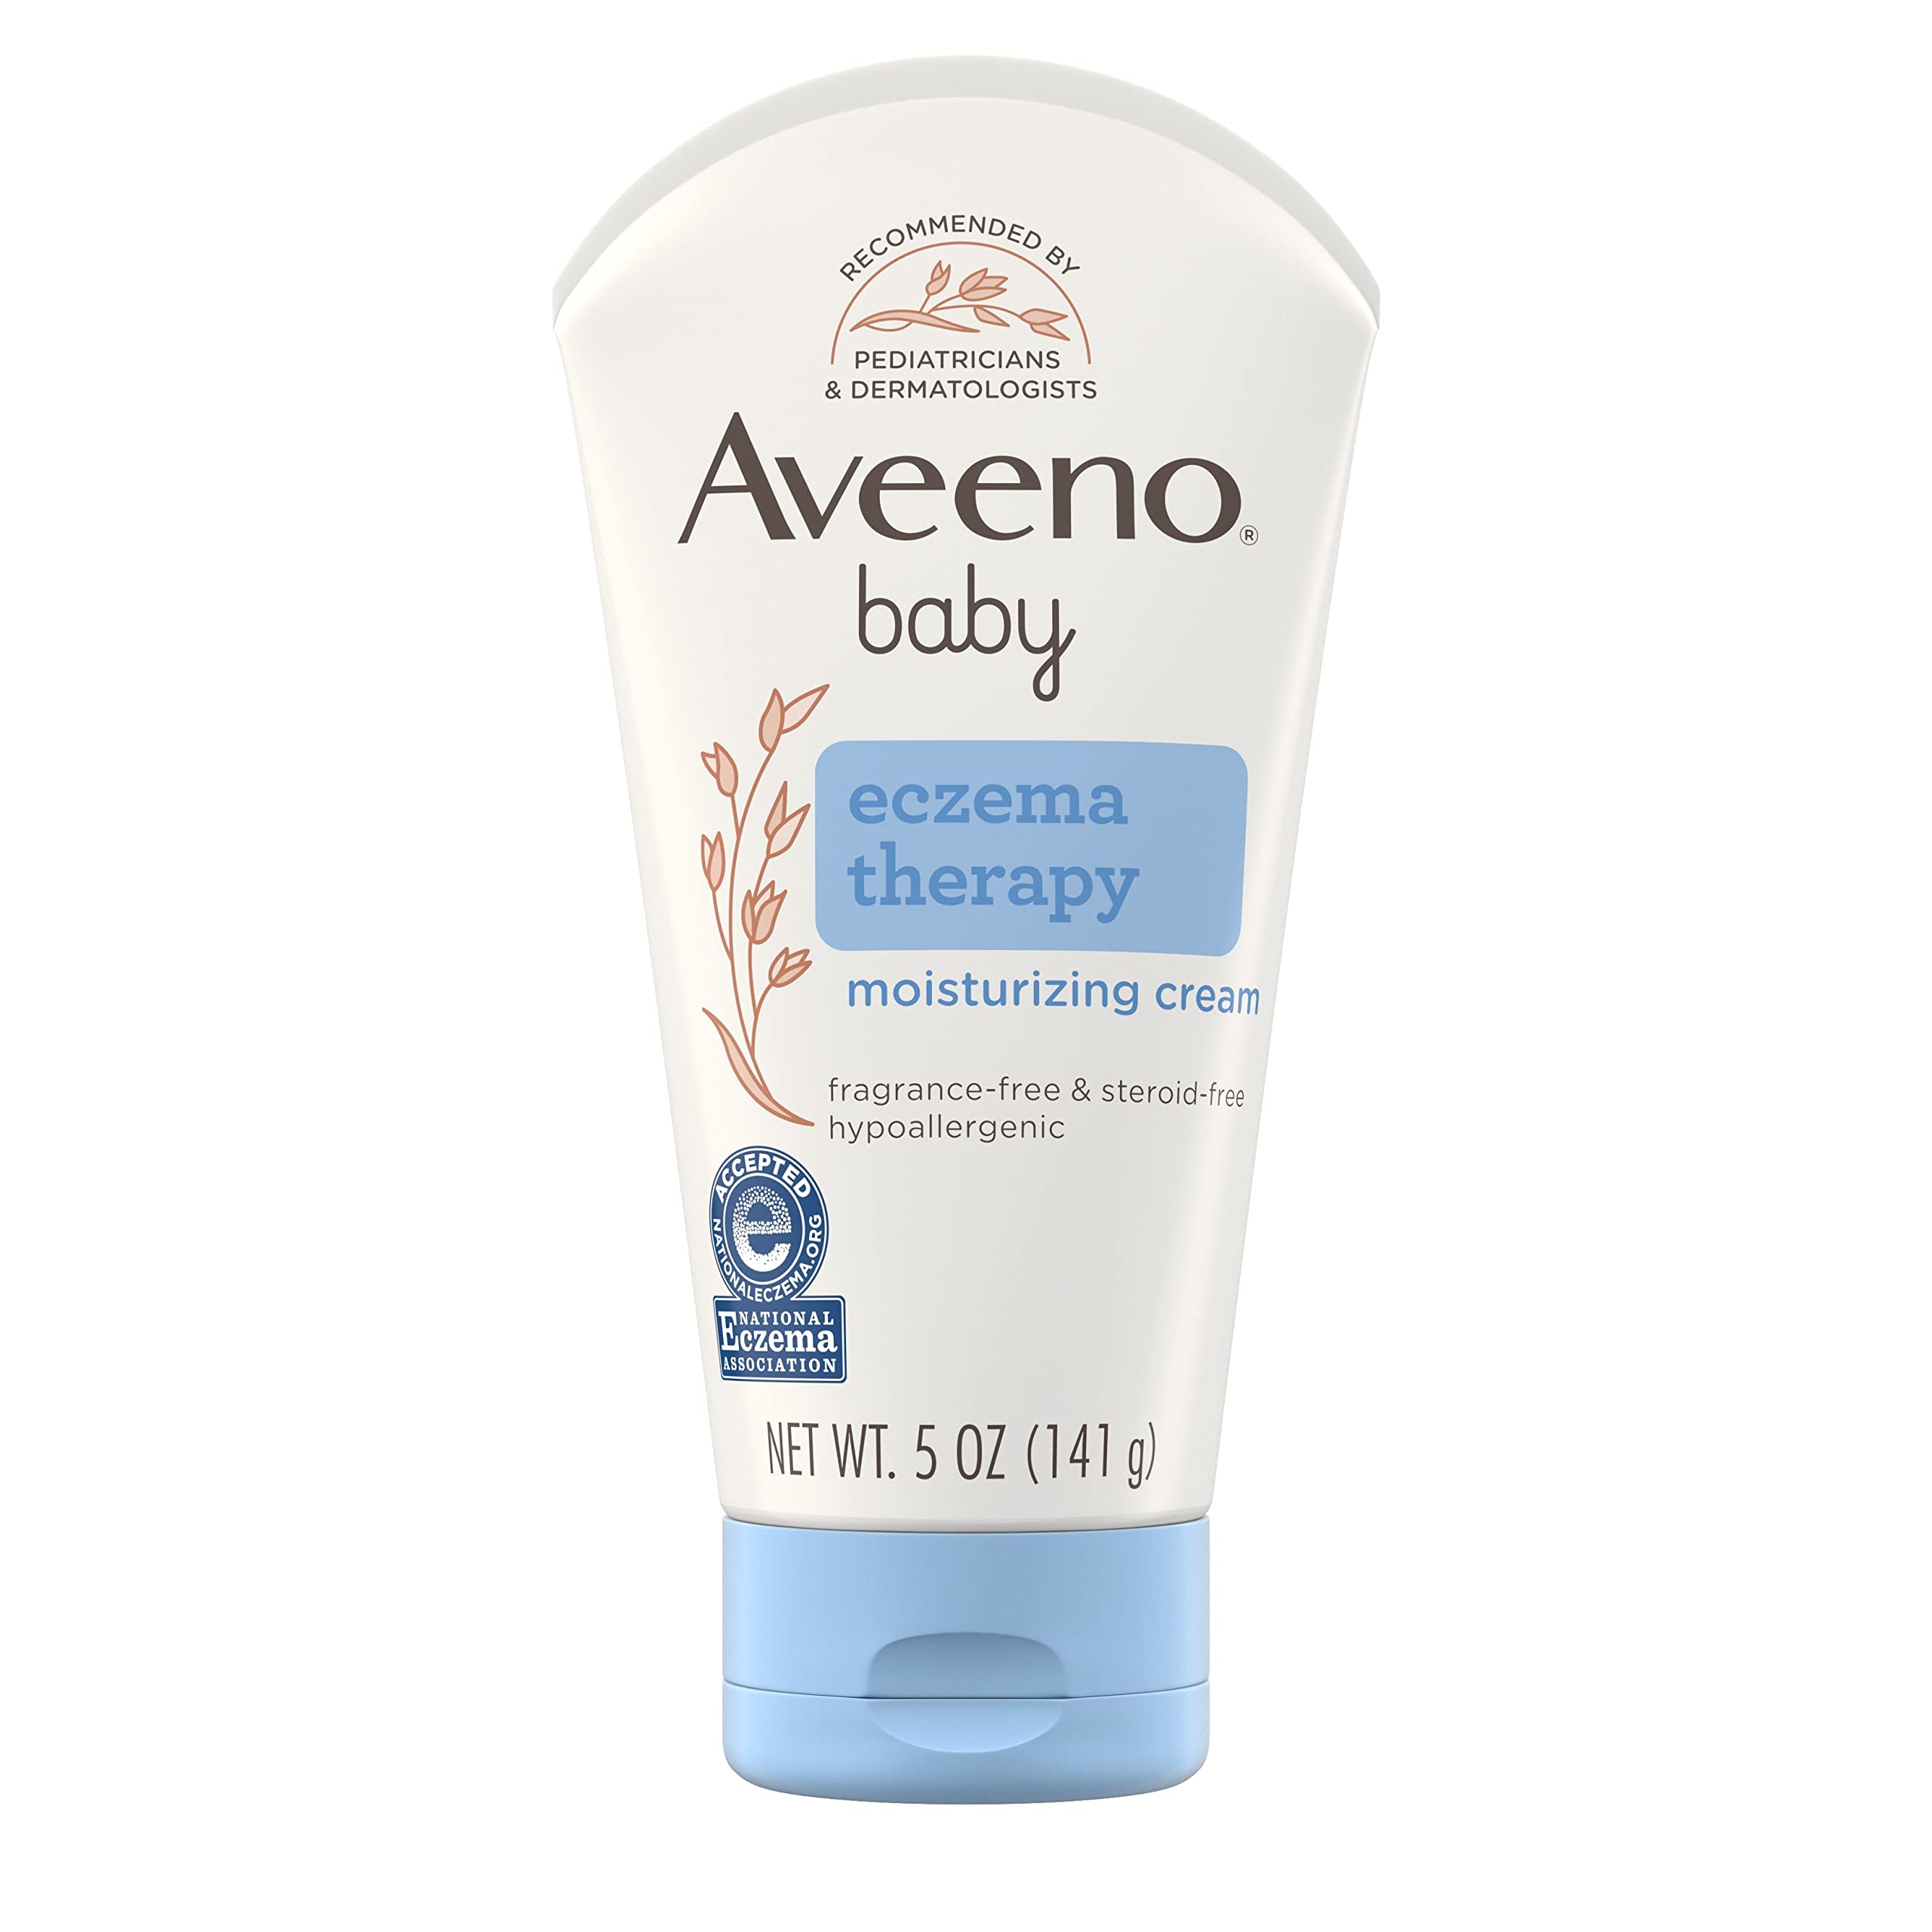 Aveeno Baby Eczema Therapy Moisturizing Cream, Natural Colloidal Oatmeal & Vitamin B5, Baby Eczema Cream for Dry, Itchy, Irritated Skin Due to Eczema, Paraben- & Steroid-Free, 5 oz Packaging May Vary